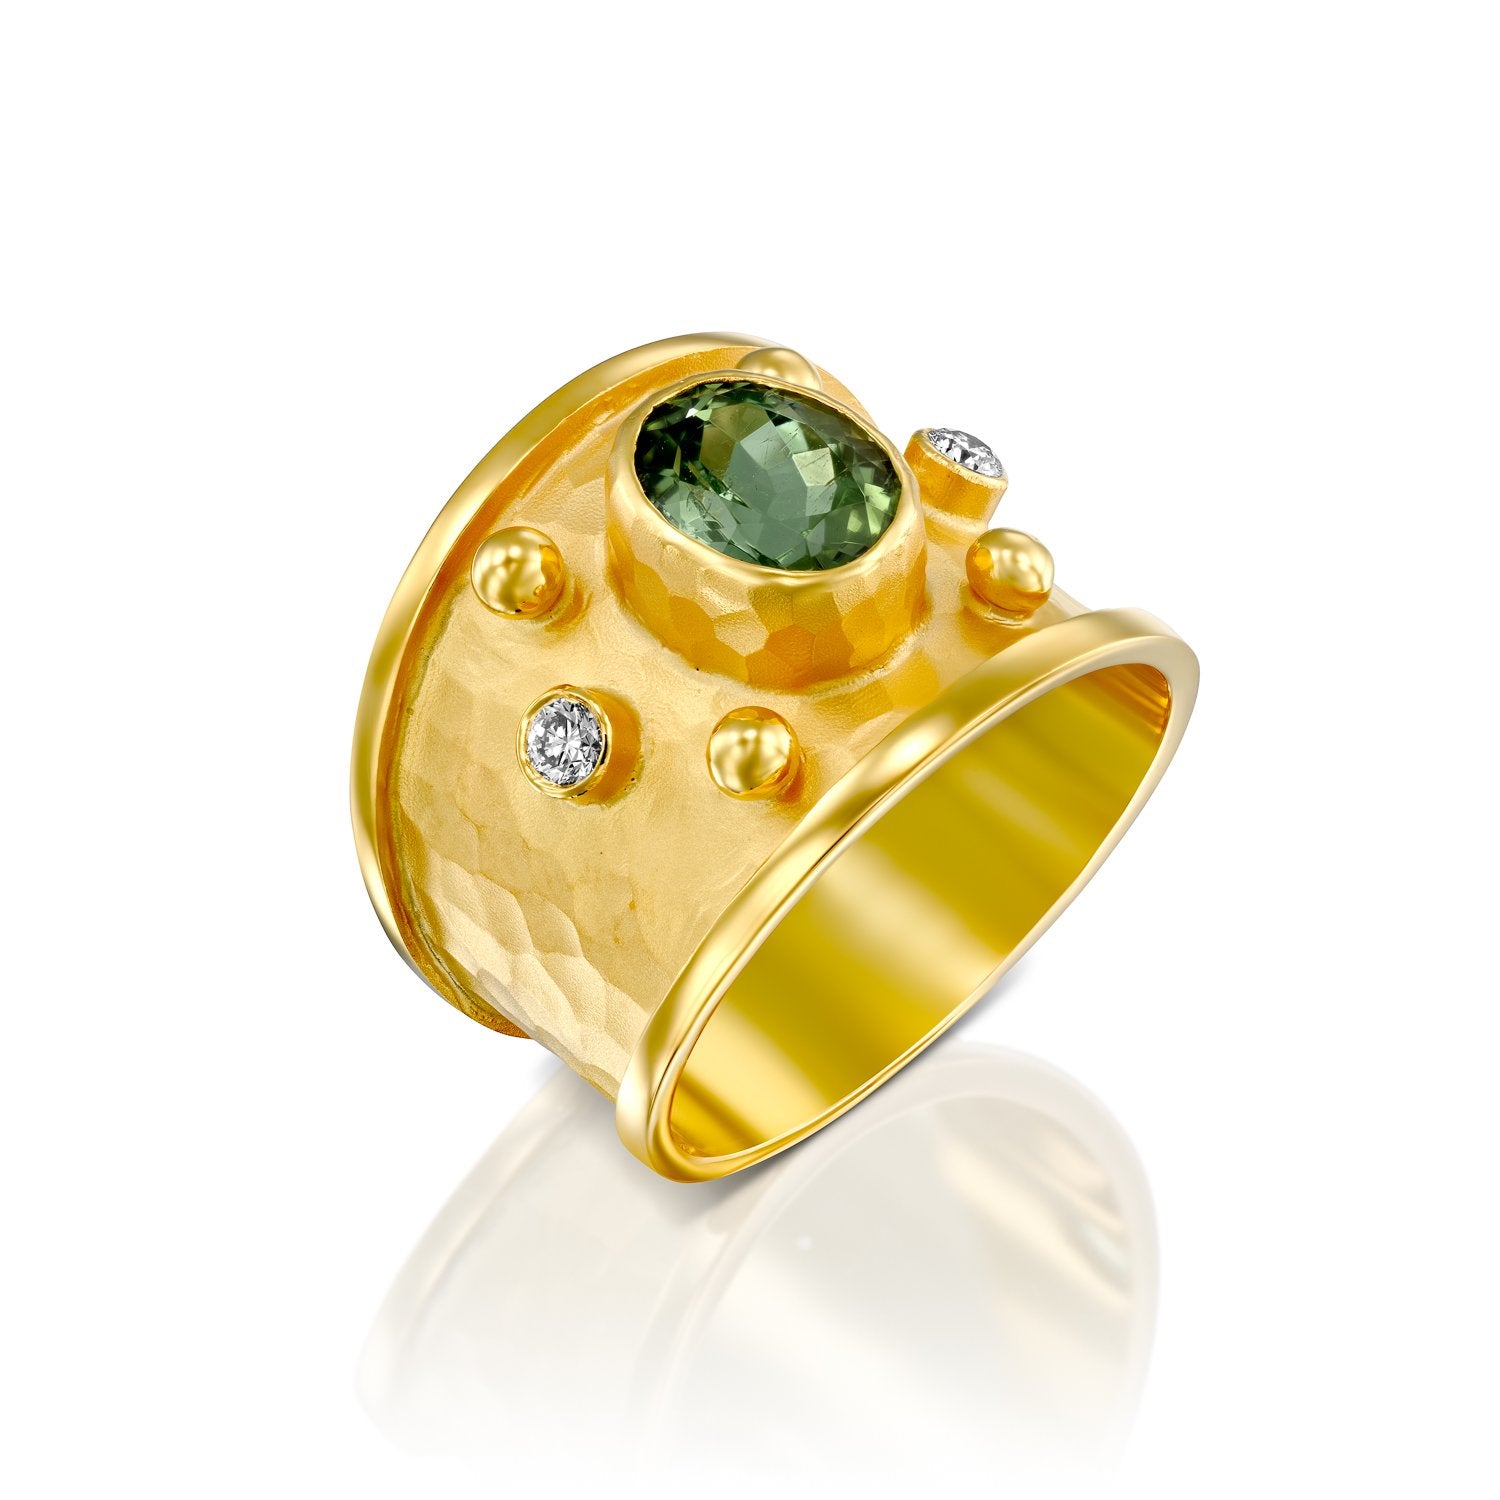 7300A - 14kt handmade matte finish yellow gold ring with shiny edges. rich color faceted green tourmaline in a bezel setting, this ring has .10cttw white diamond of the finest quality. 